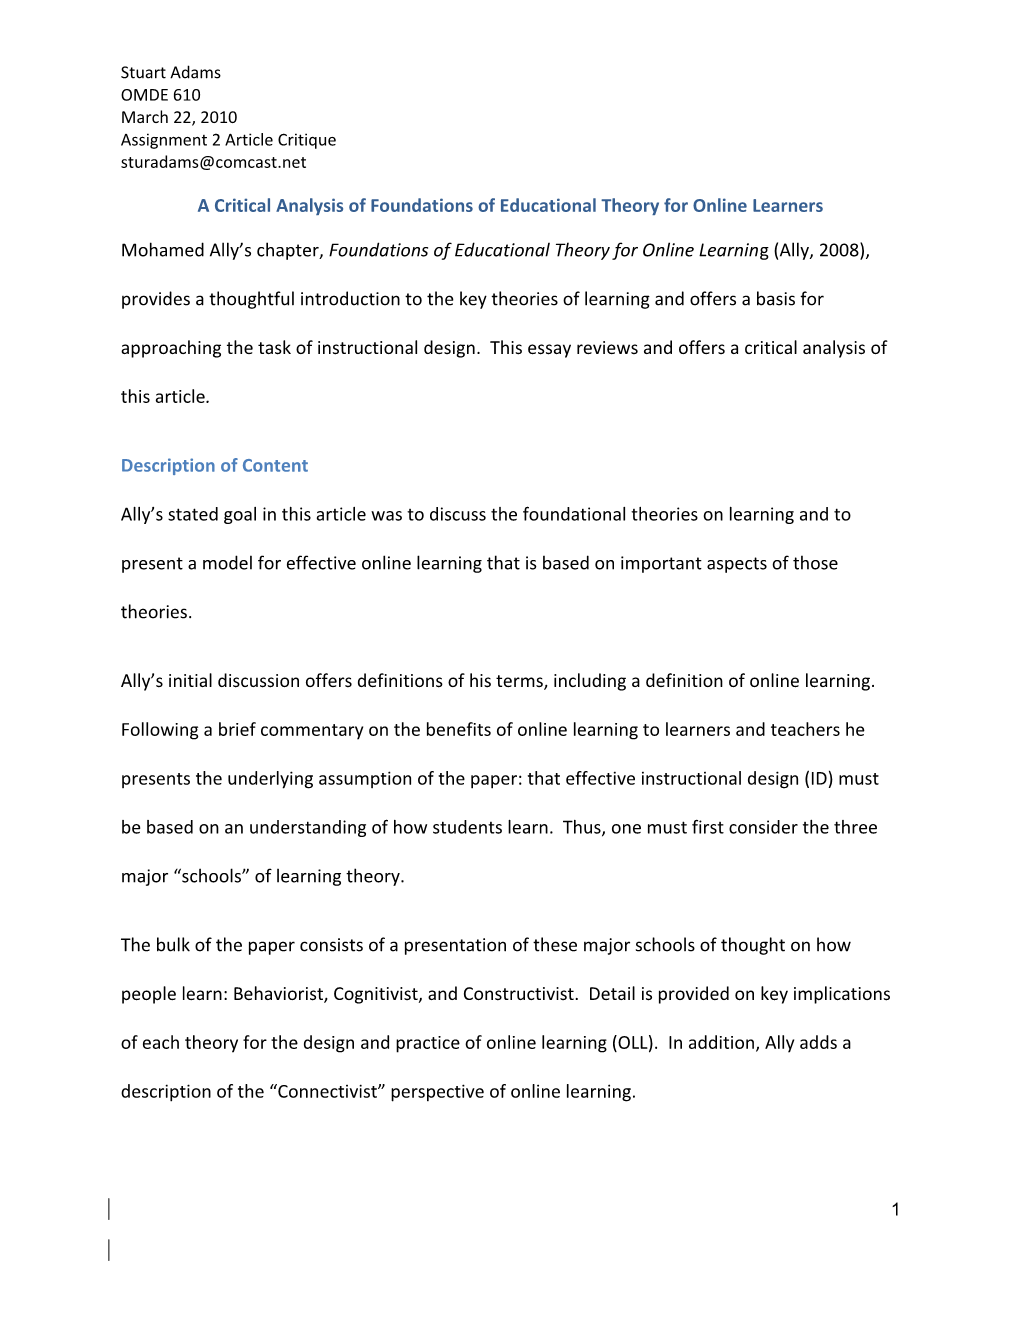 Mohamed Ally S Chapter, Foundations of Educational Theory for Online Learning, Serves As